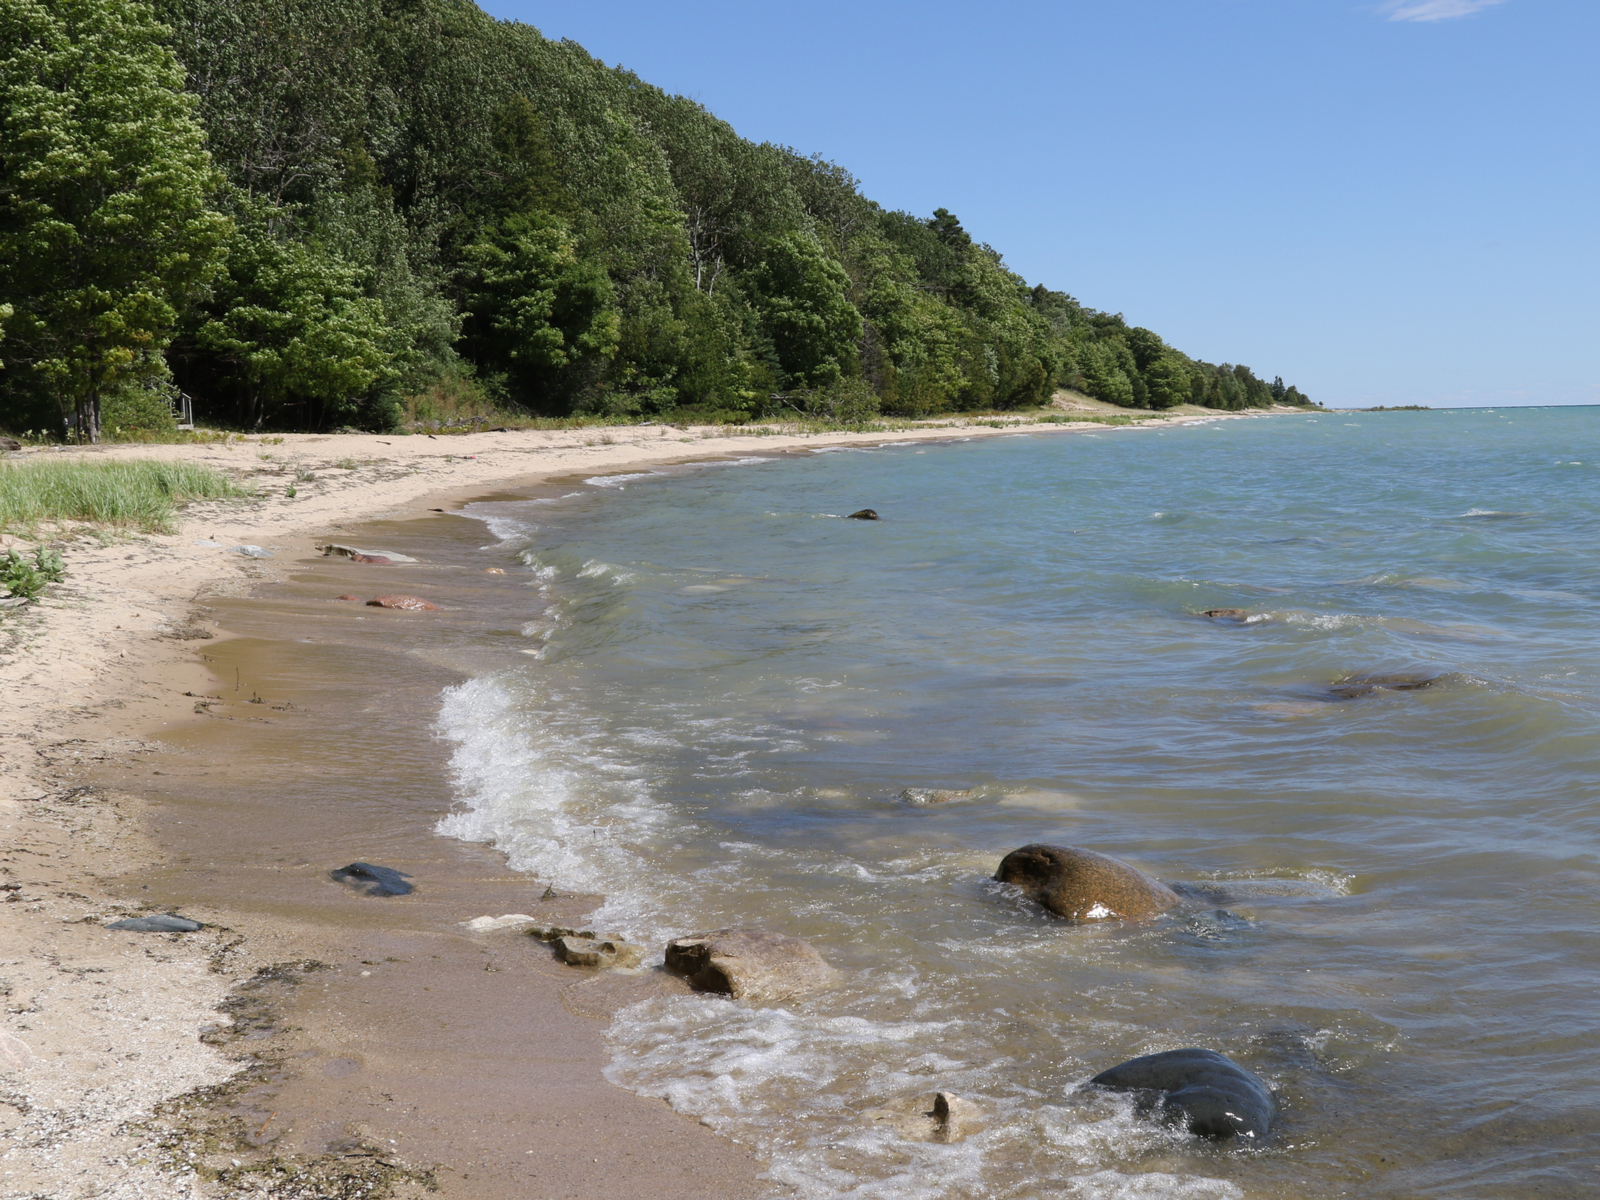 Unspoiled beach view of Lake Michigan from one of the best places to visit in Michigan, Beaver Island